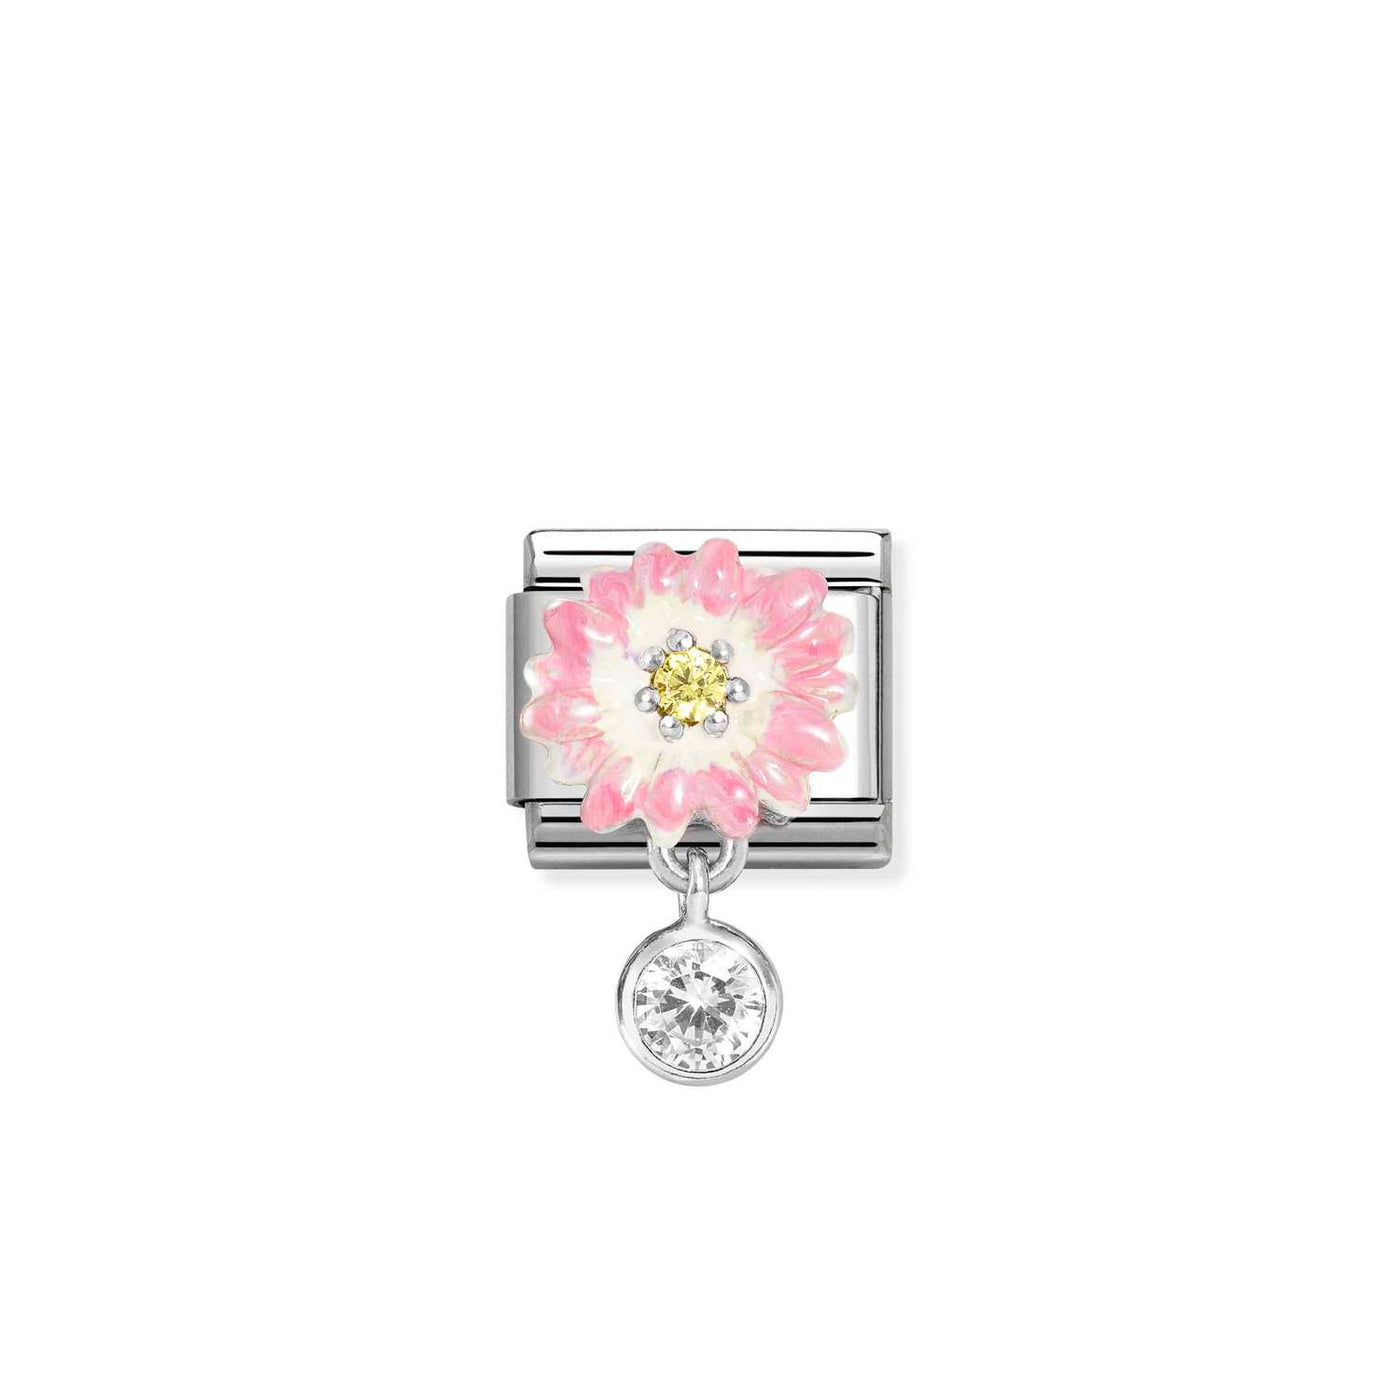 Nomination Classic Silver Cubic Zirconia Pink Daisy Round Drop Charm